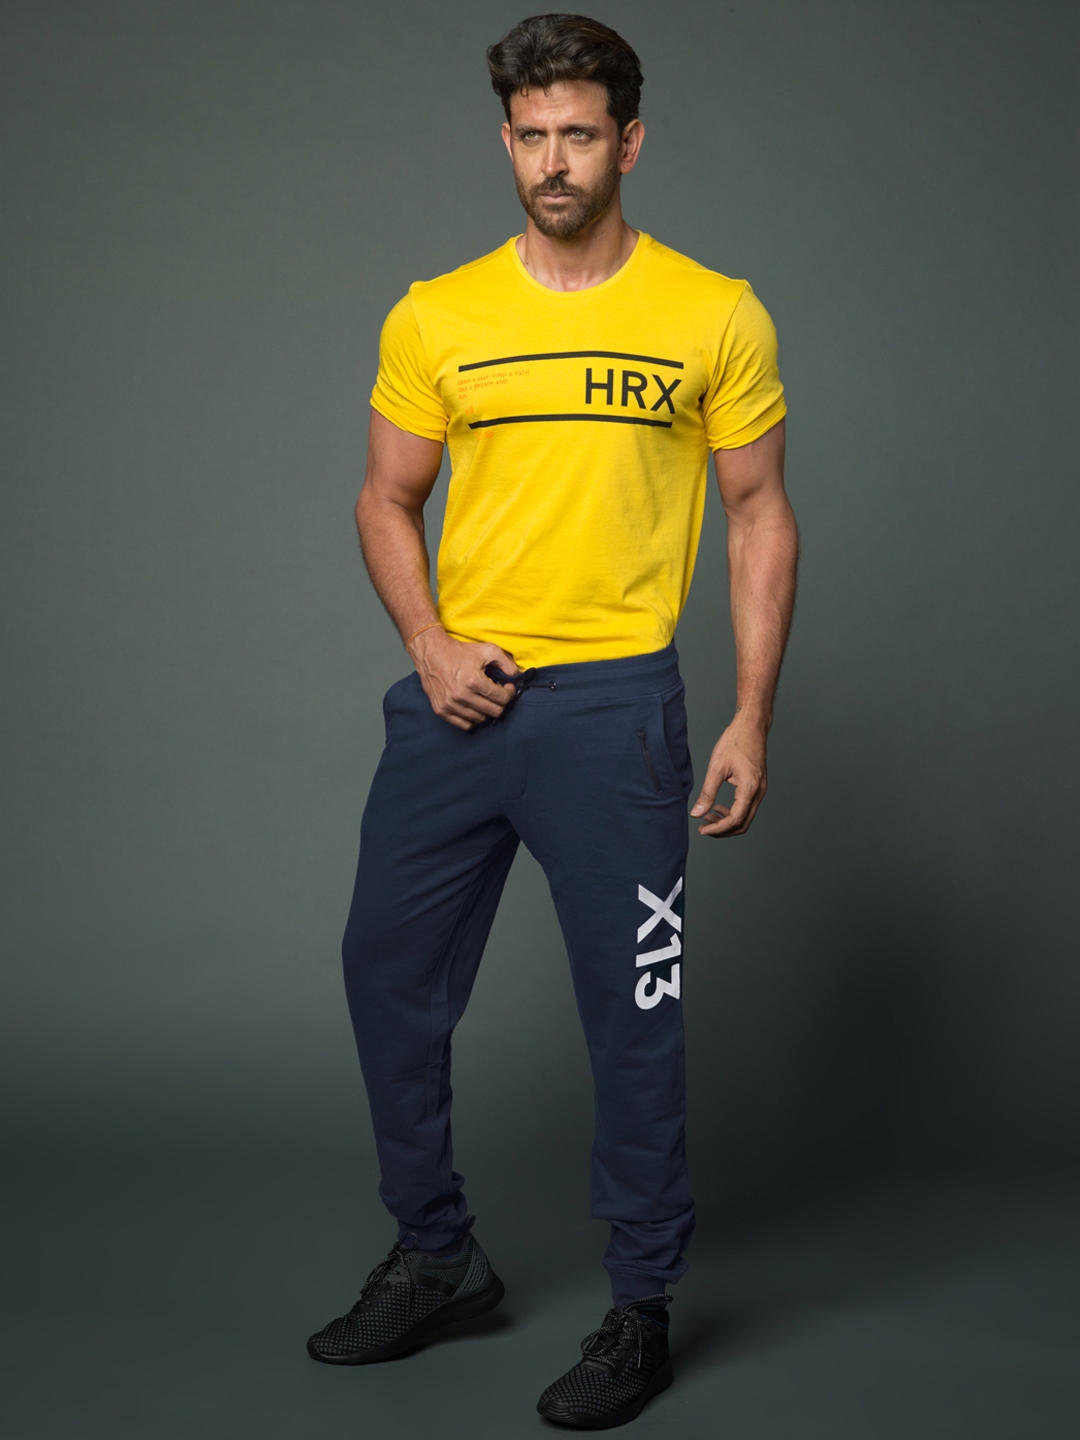 HRX Sportswear in Bangalore at best price by Jai Sports